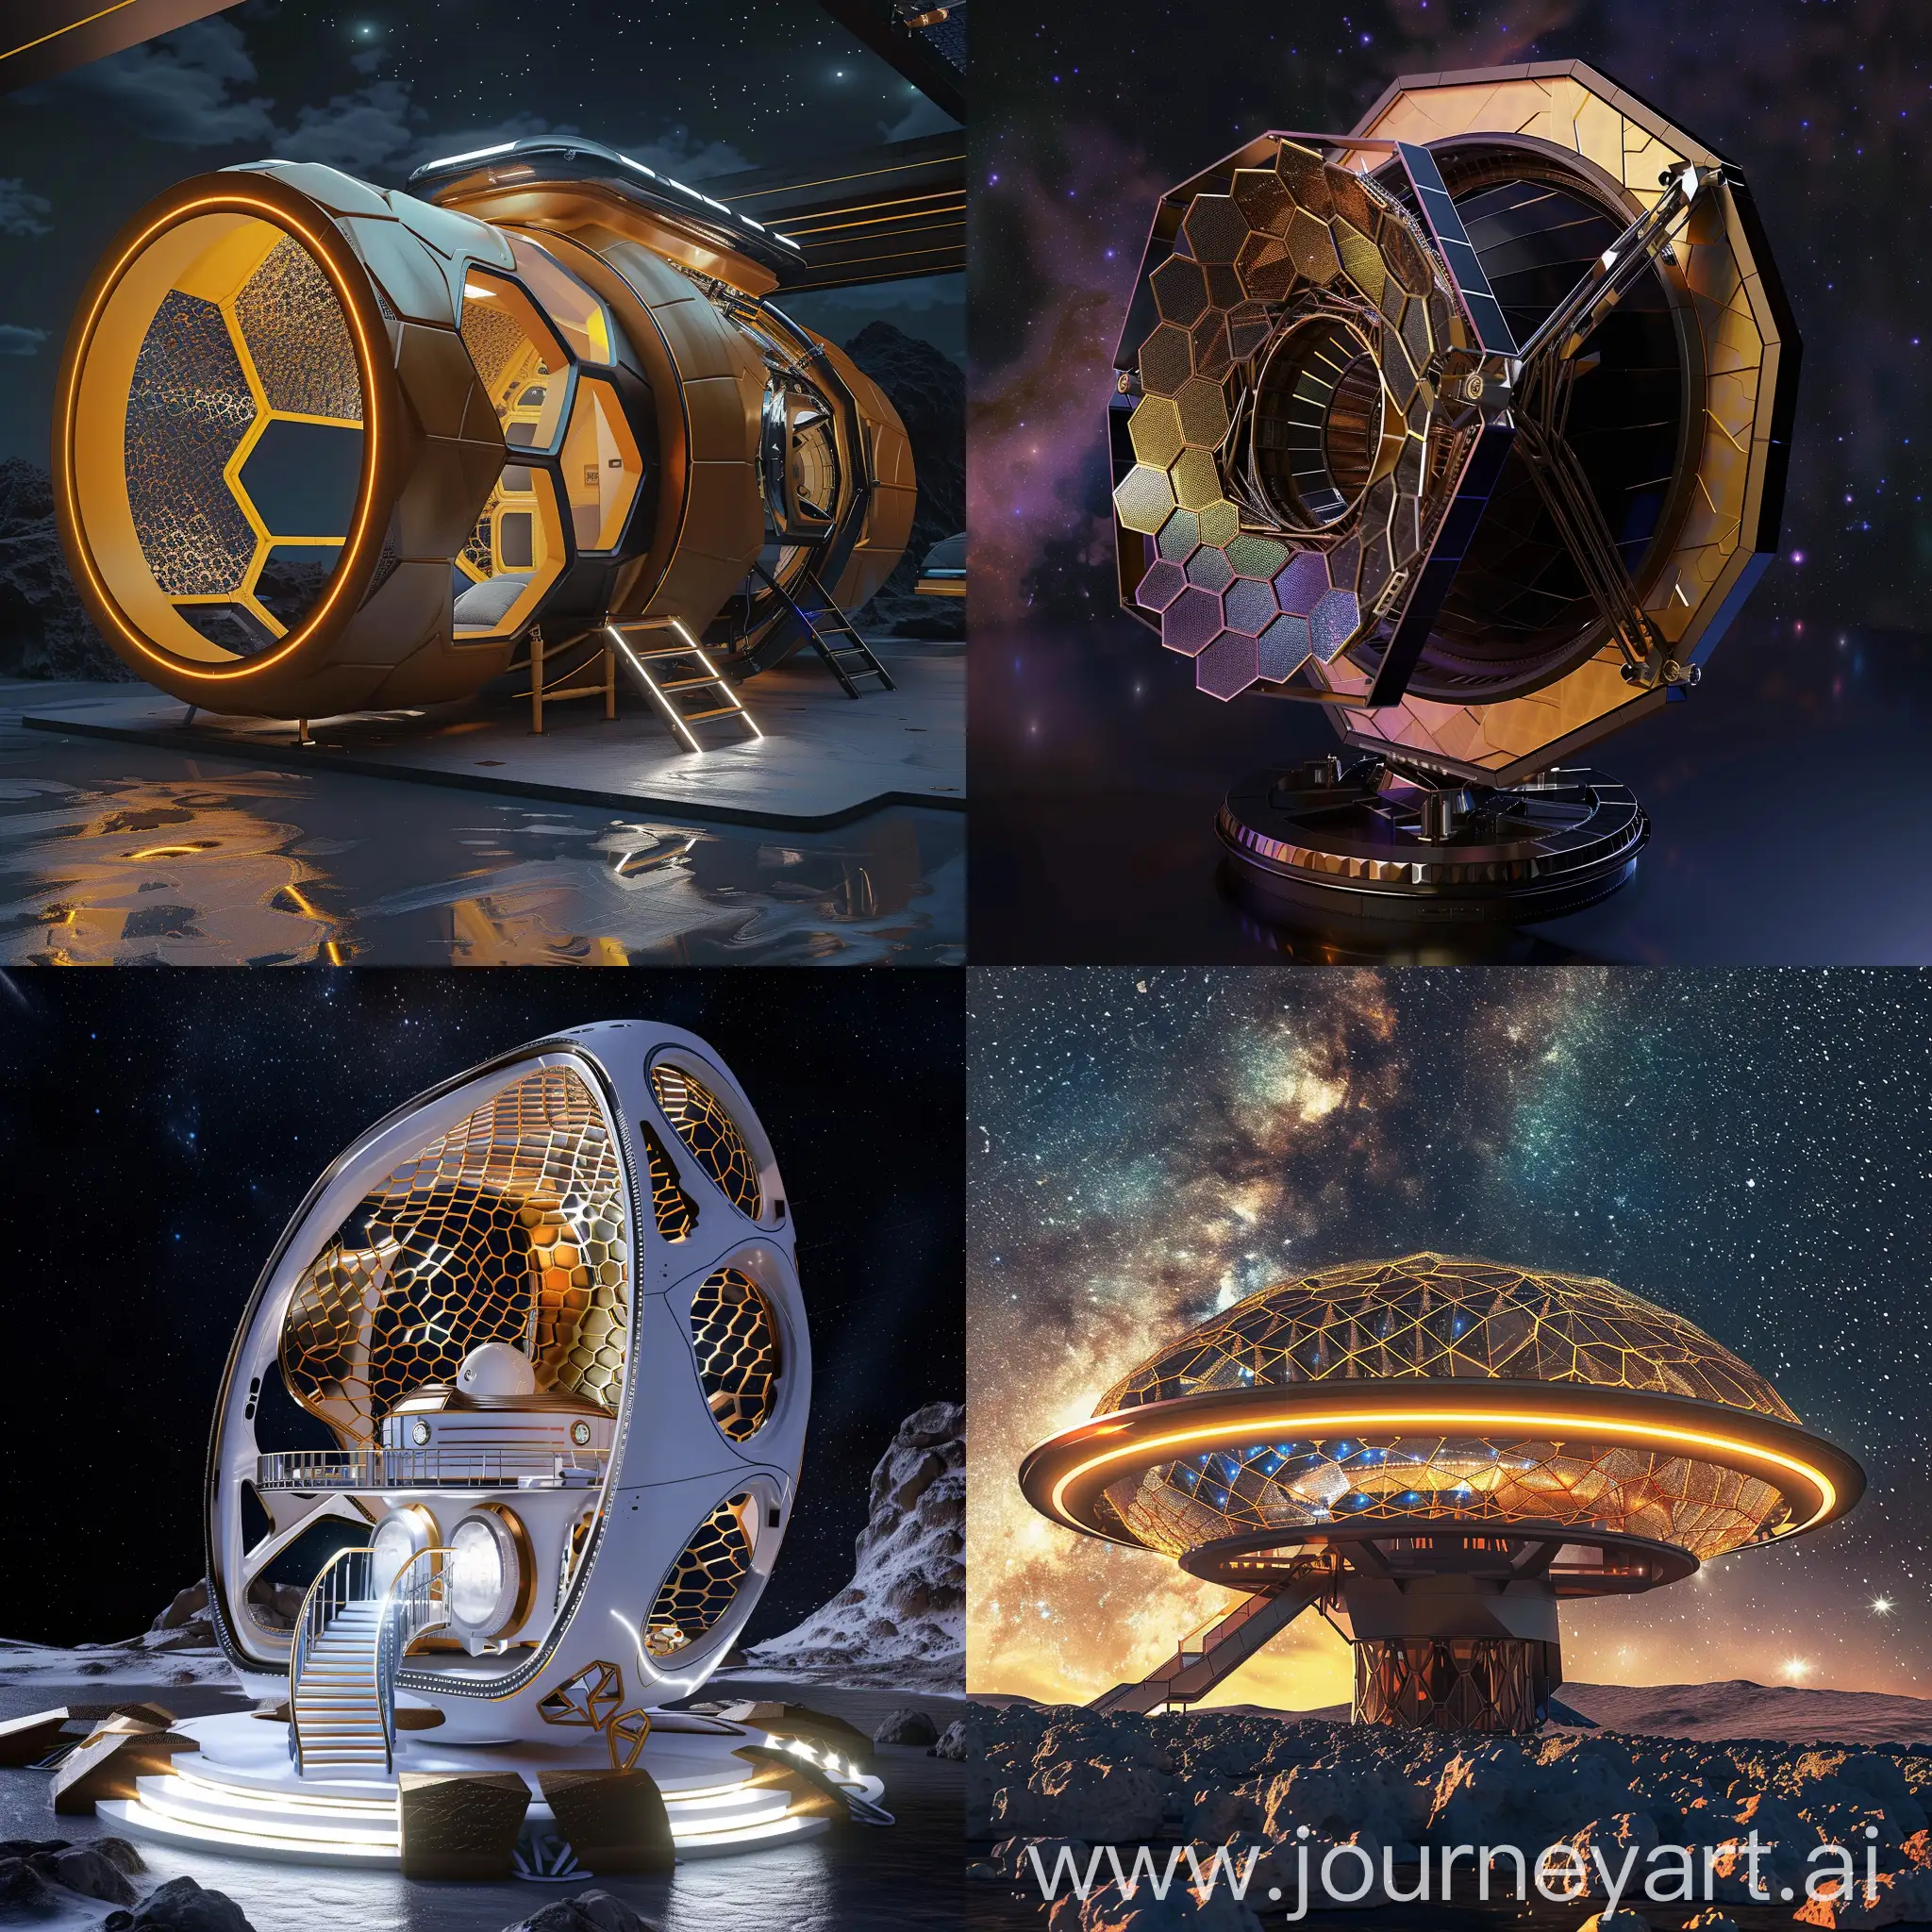 Futuristic-Space-Telescope-with-Integrated-Holographic-Displays-and-Organic-Architecture